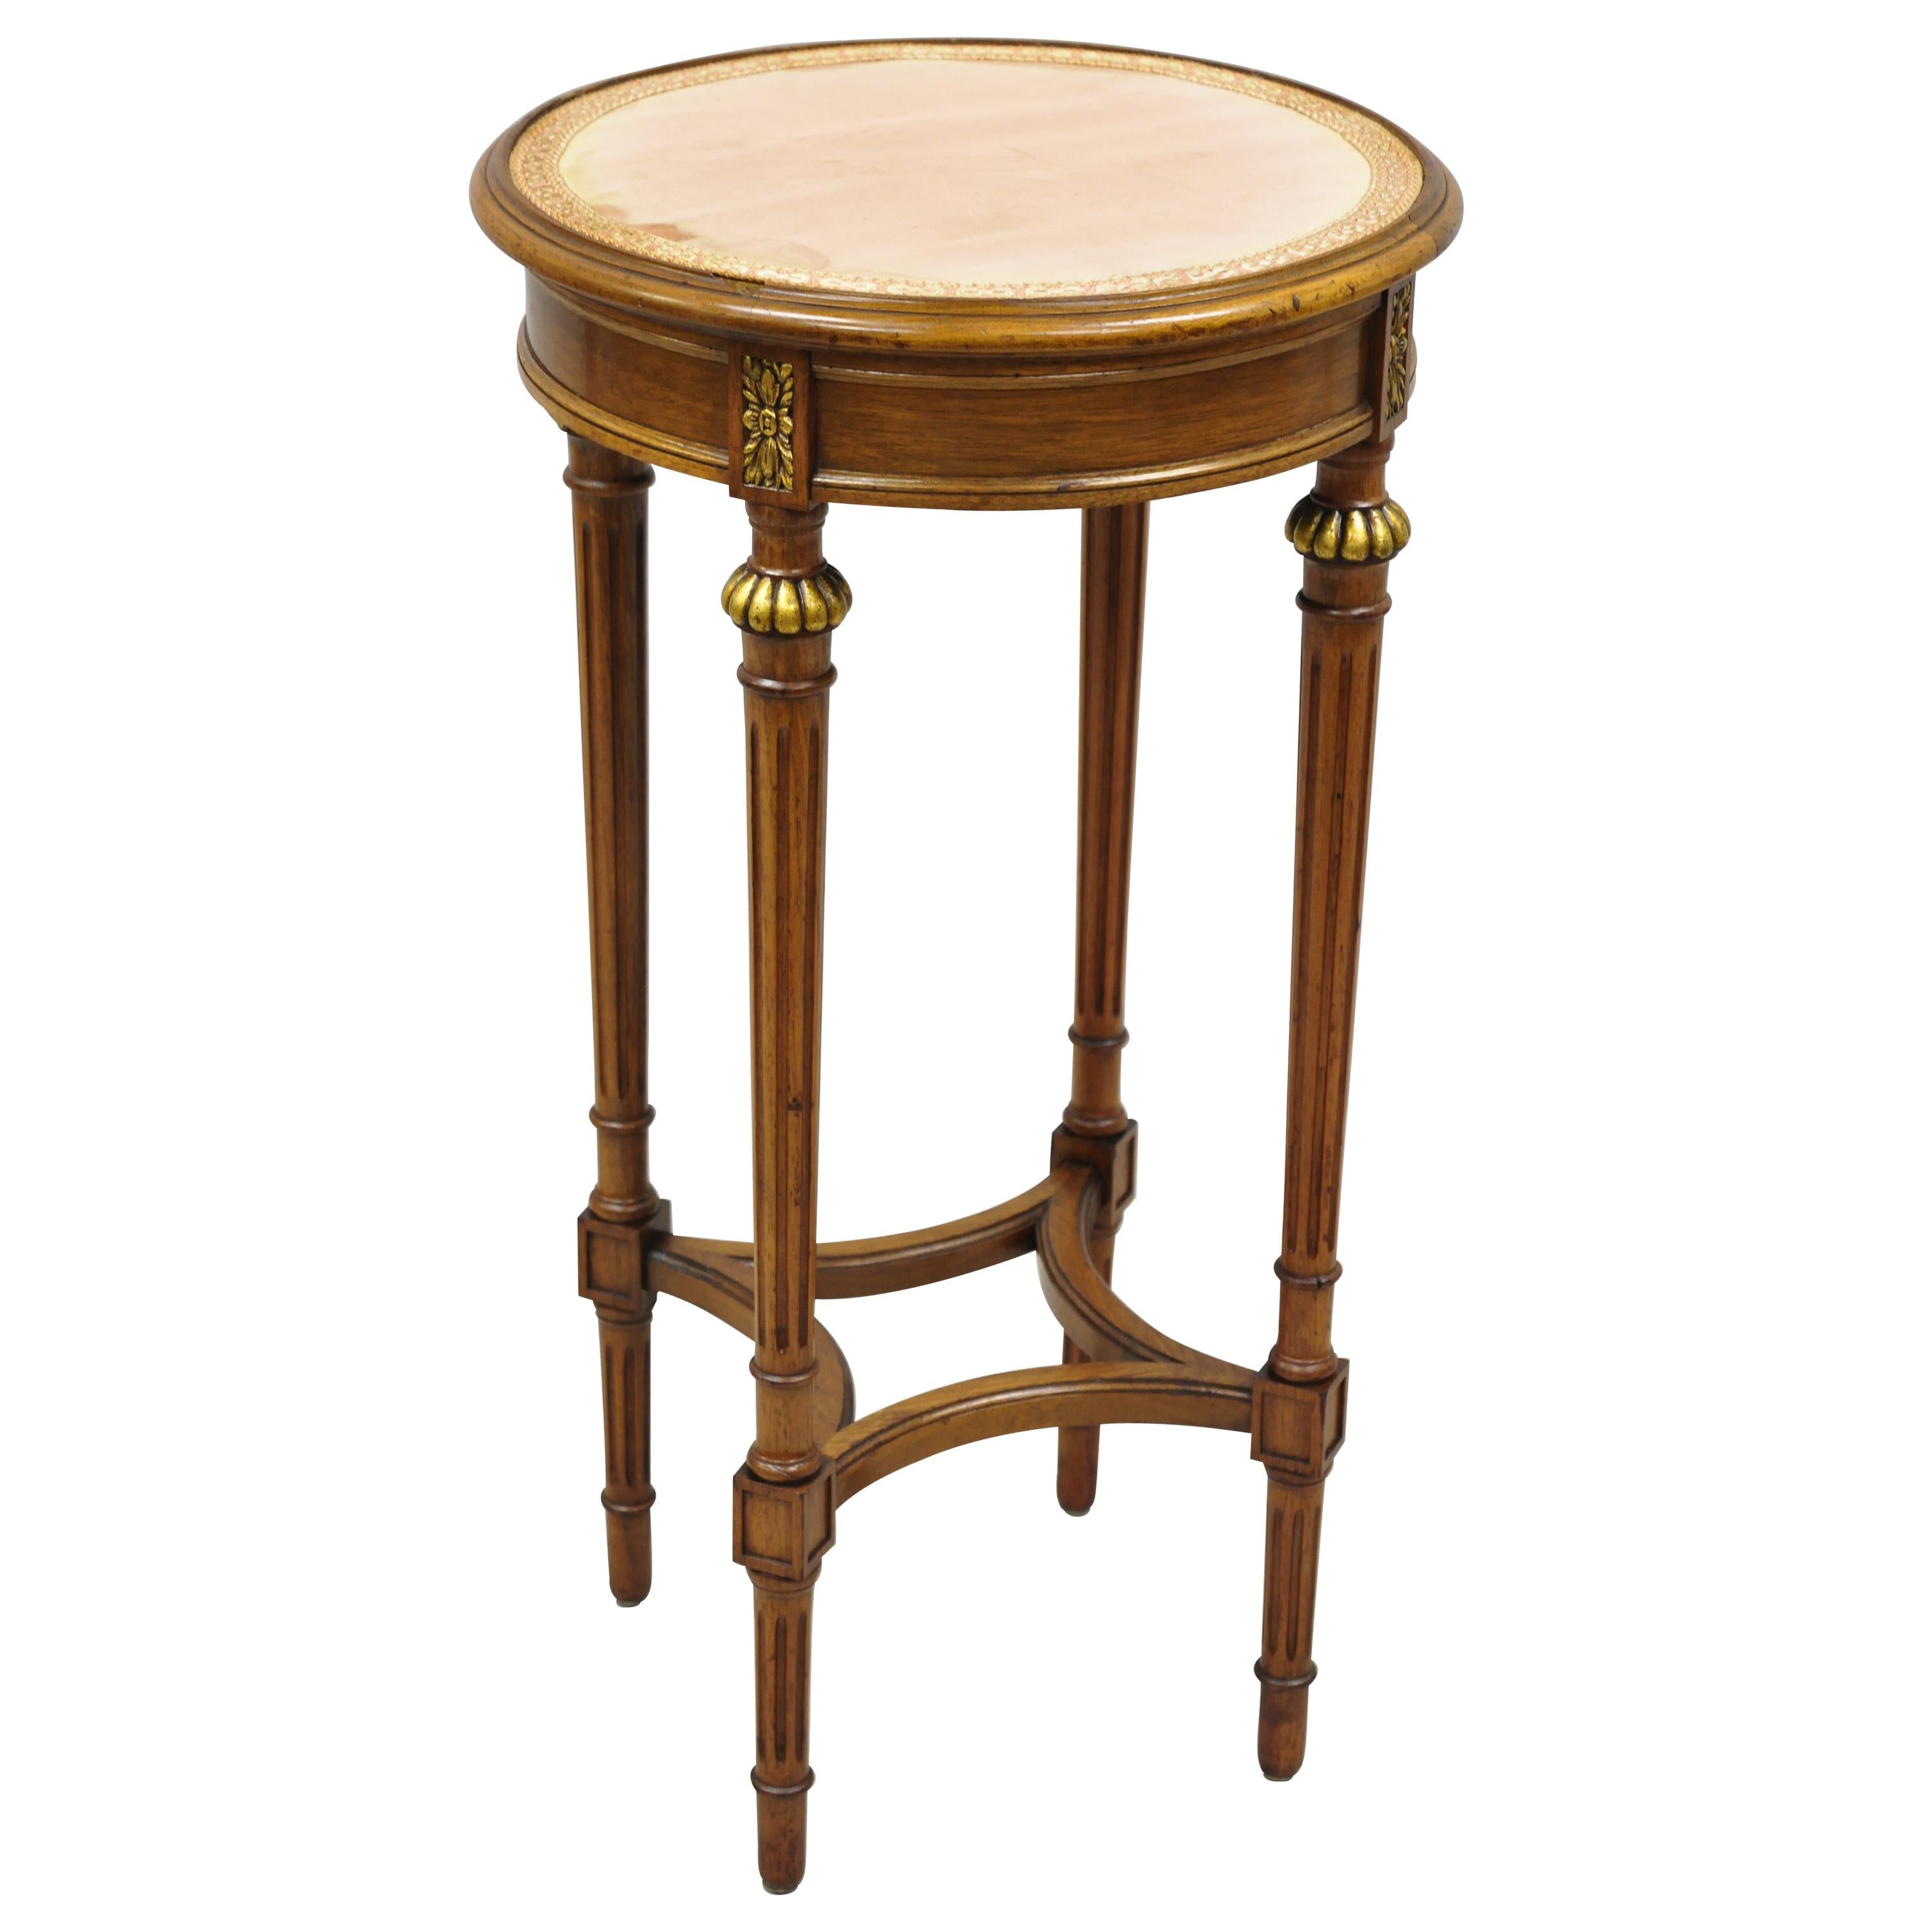 Small Antique Round Tables For, Small Round Antique Table Photos